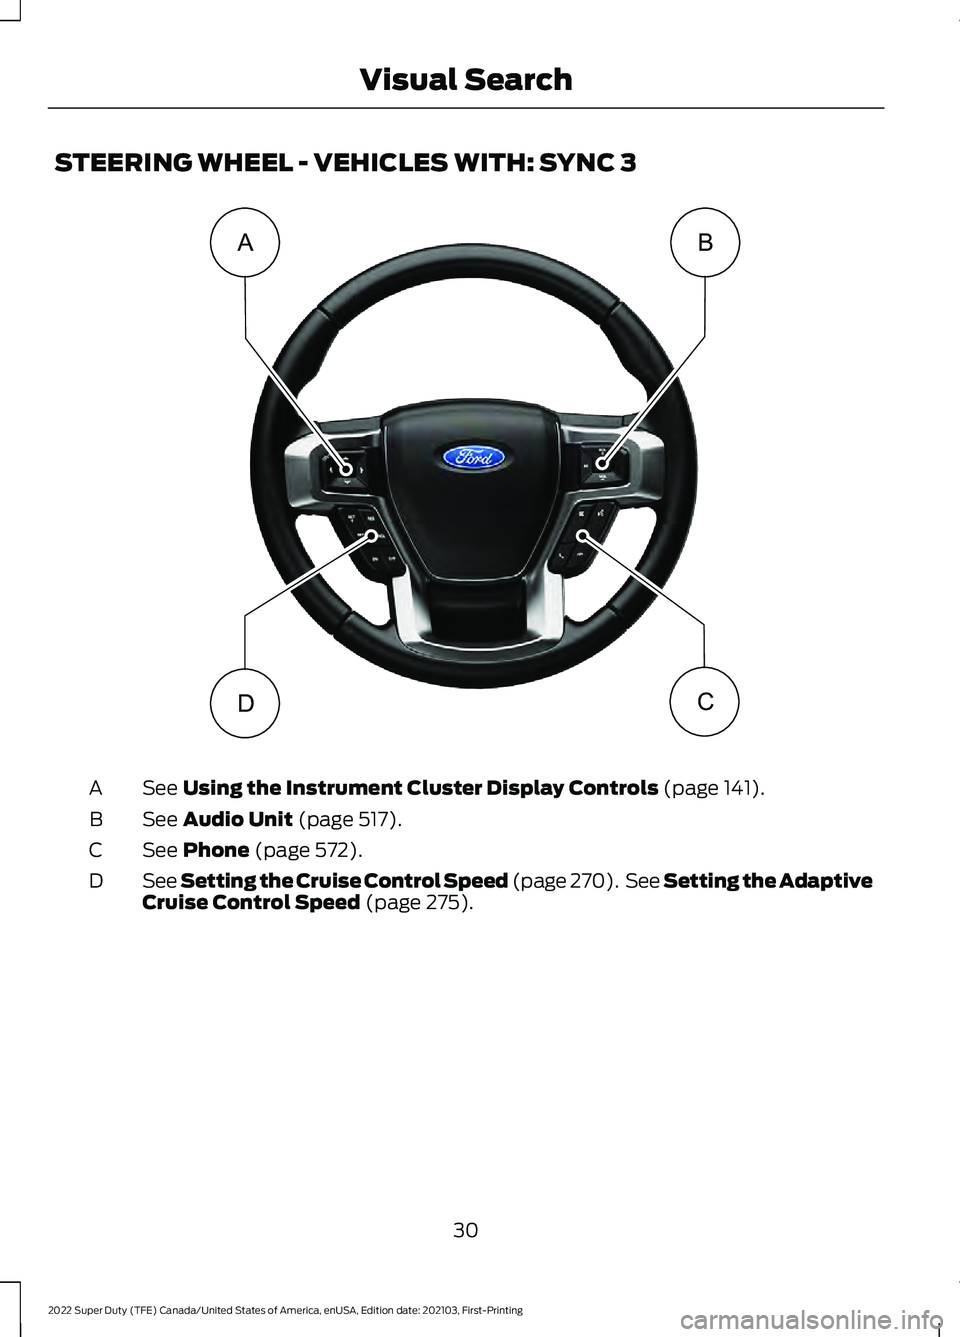 FORD F-250 2022  Owners Manual STEERING WHEEL - VEHICLES WITH: SYNC 3
See Using the Instrument Cluster Display Controls (page 141).
A
See 
Audio Unit (page 517).
B
See 
Phone (page 572).
C
See Setting the Cruise Control Speed (page